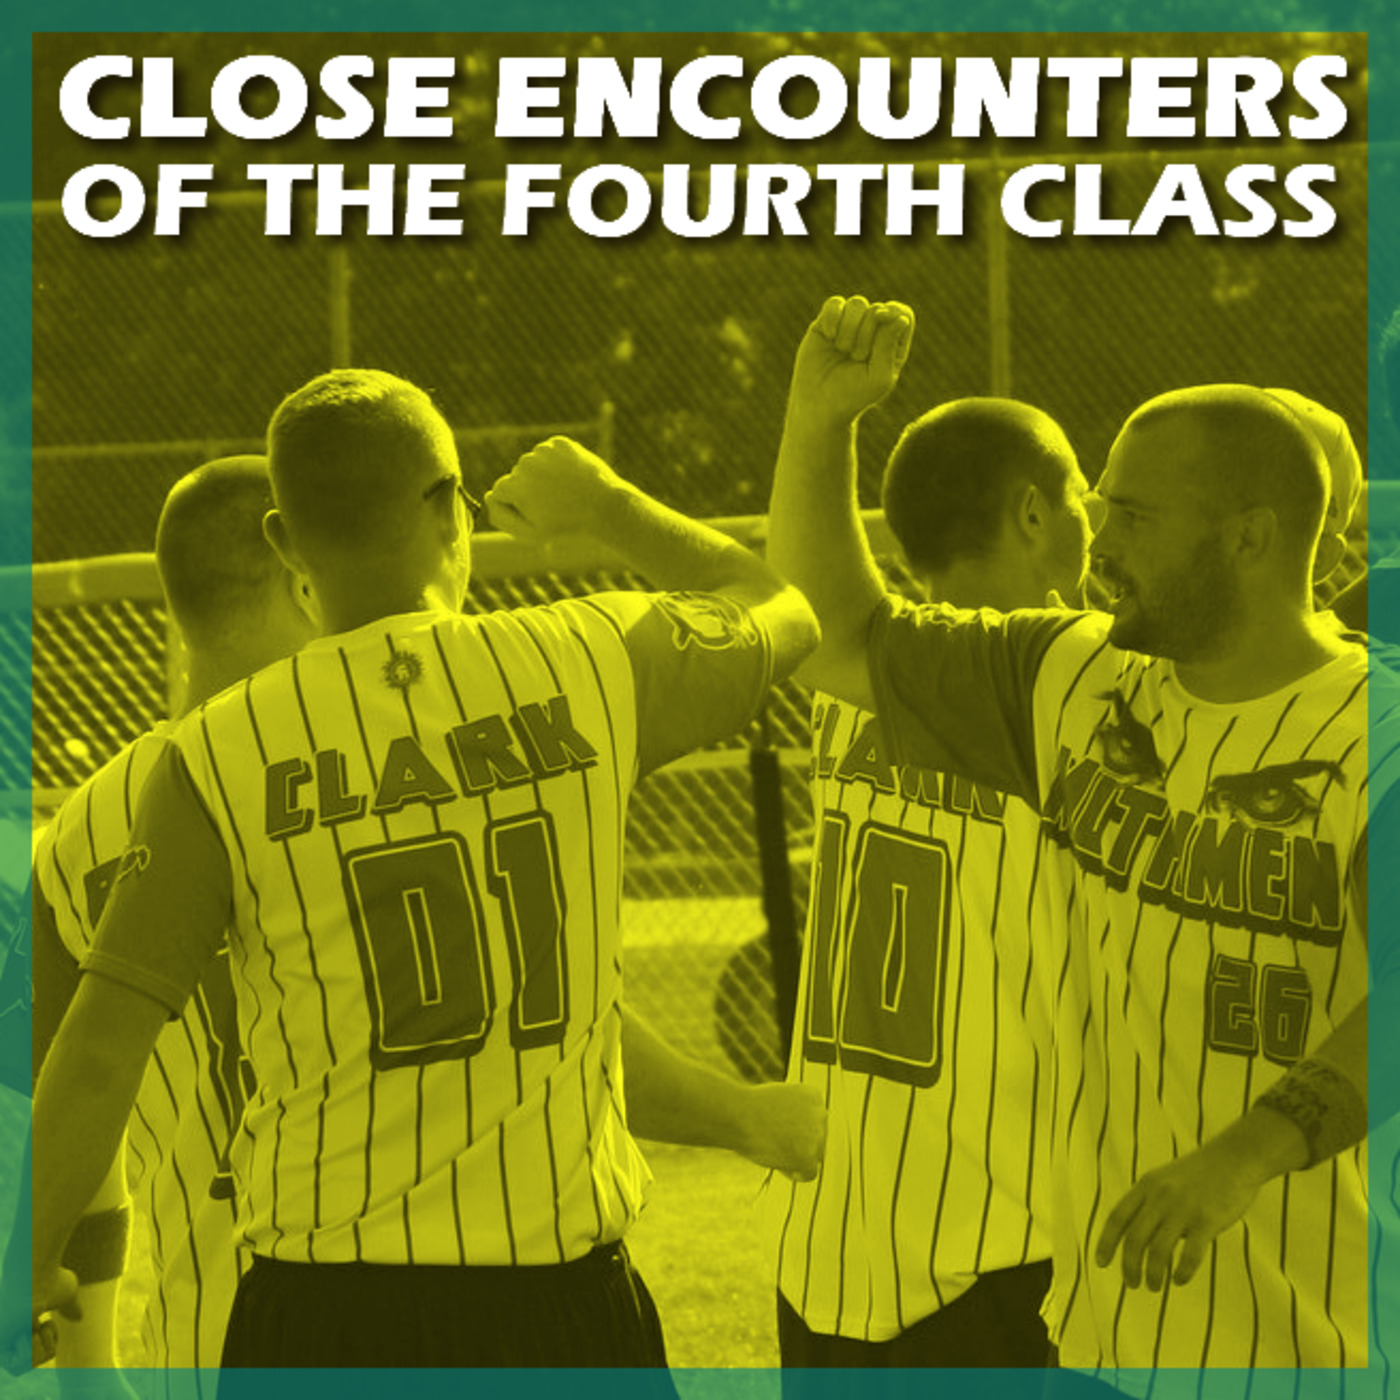 Episode 38: Episode 38: Close Encounters of the Fourth Class